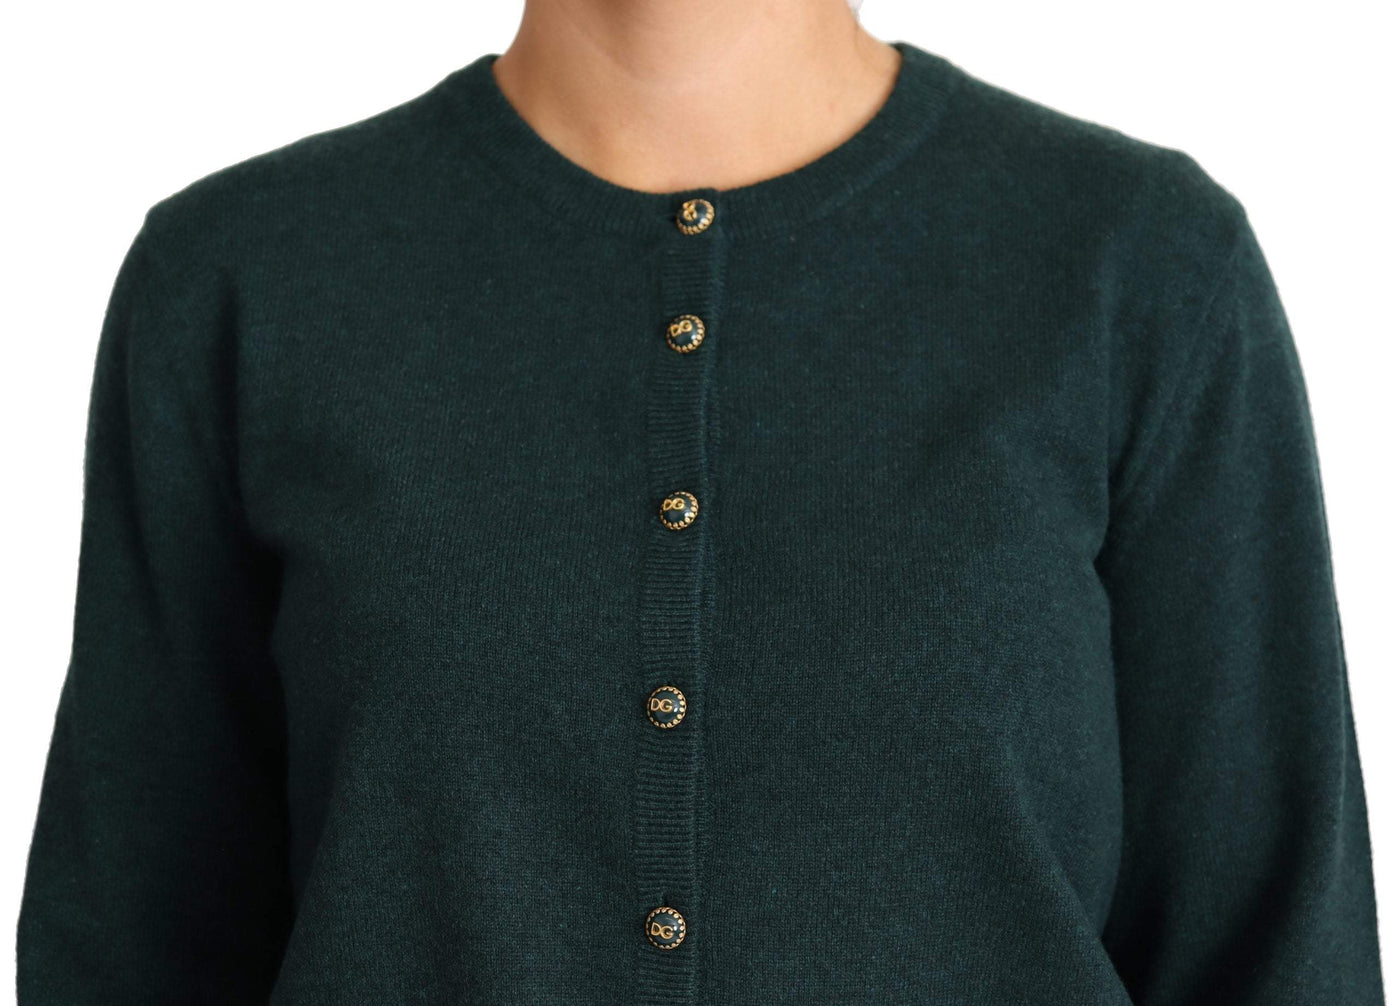 Dolce & Gabbana Dark Green Cashmere Crewneck Cardigan Sweater #women, Dolce & Gabbana, feed-agegroup-adult, feed-color-green, feed-gender-female, feed-size-IT40|S, feed-size-IT44|L, Green, IT40|S, IT44|L, Sweaters - Women - Clothing, Women - New Arrivals at SEYMAYKA